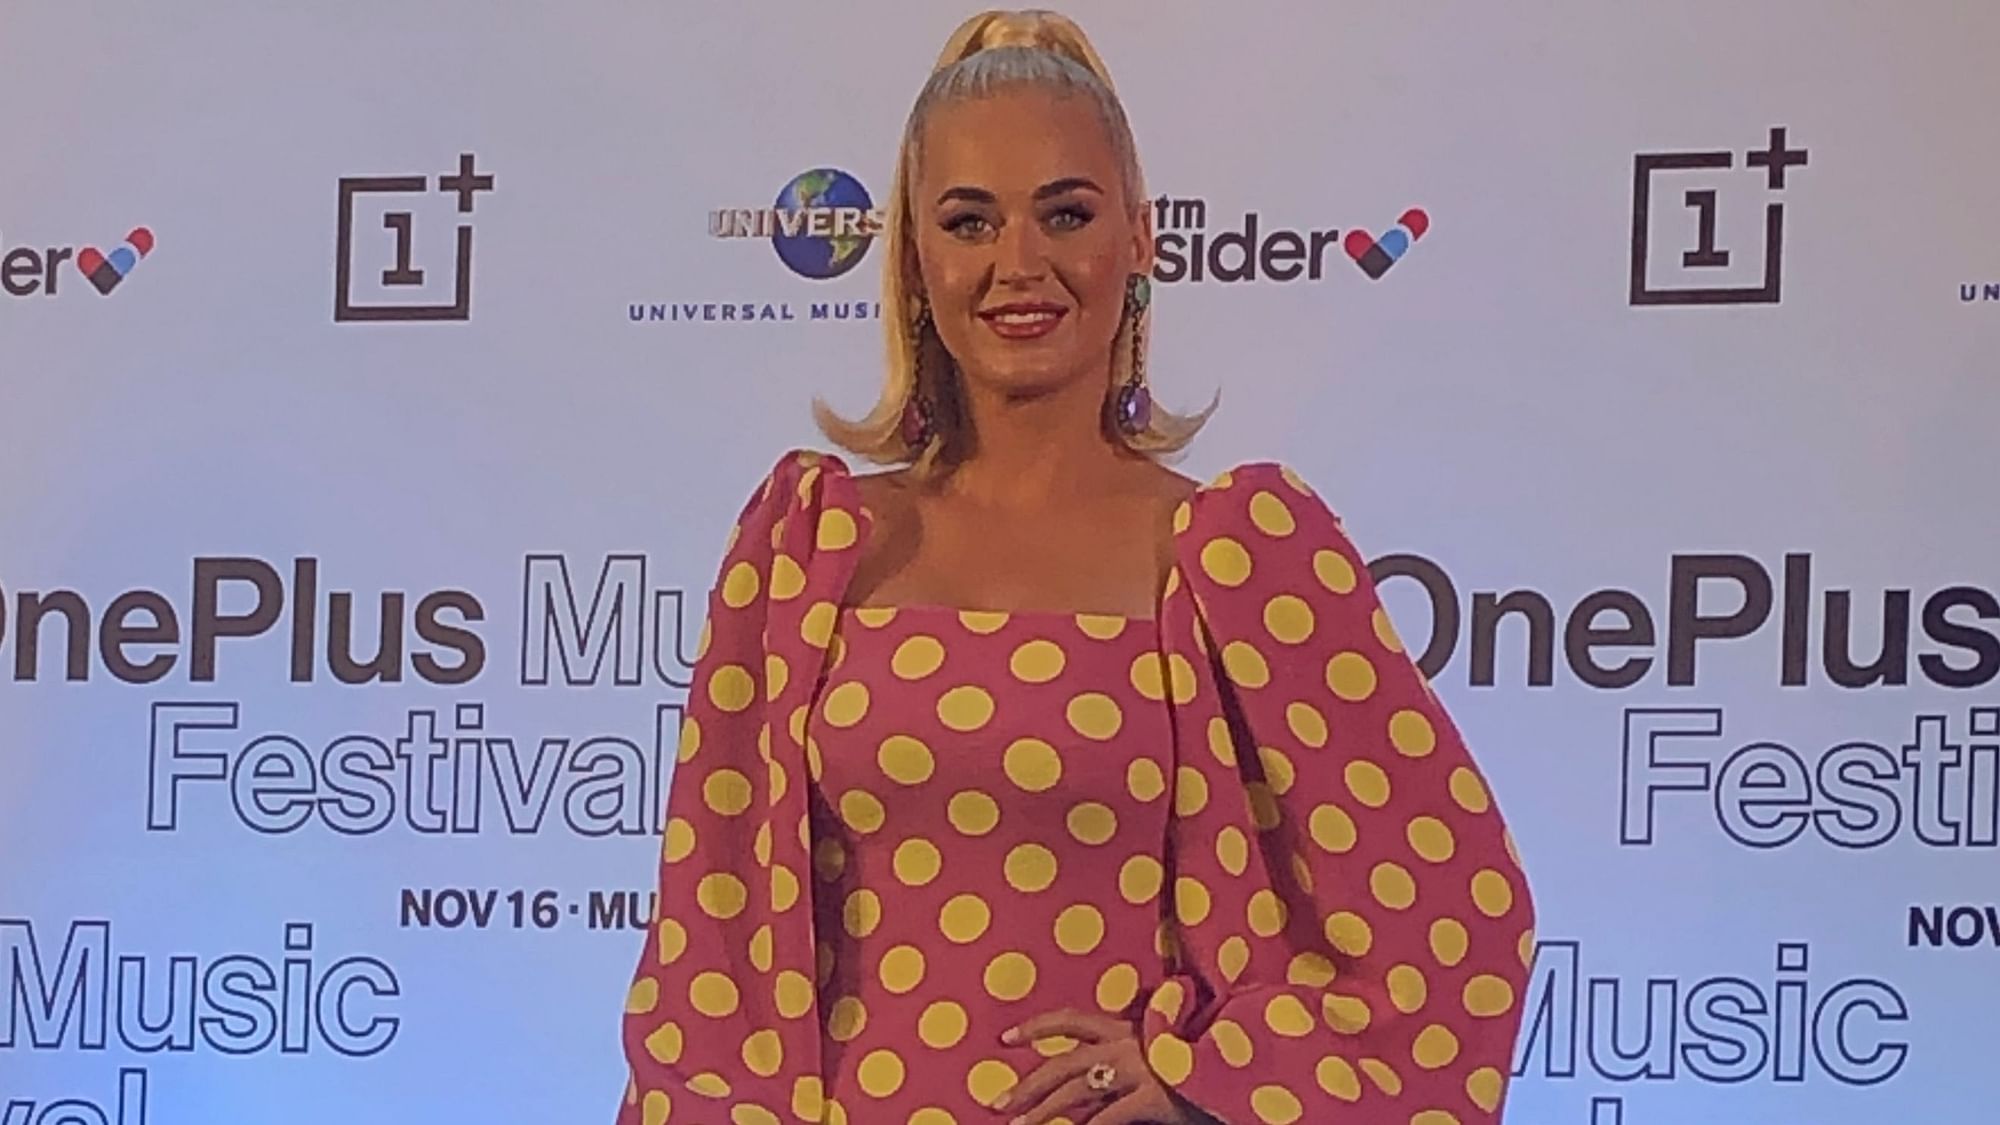 Katy Perry for her press conference in India.